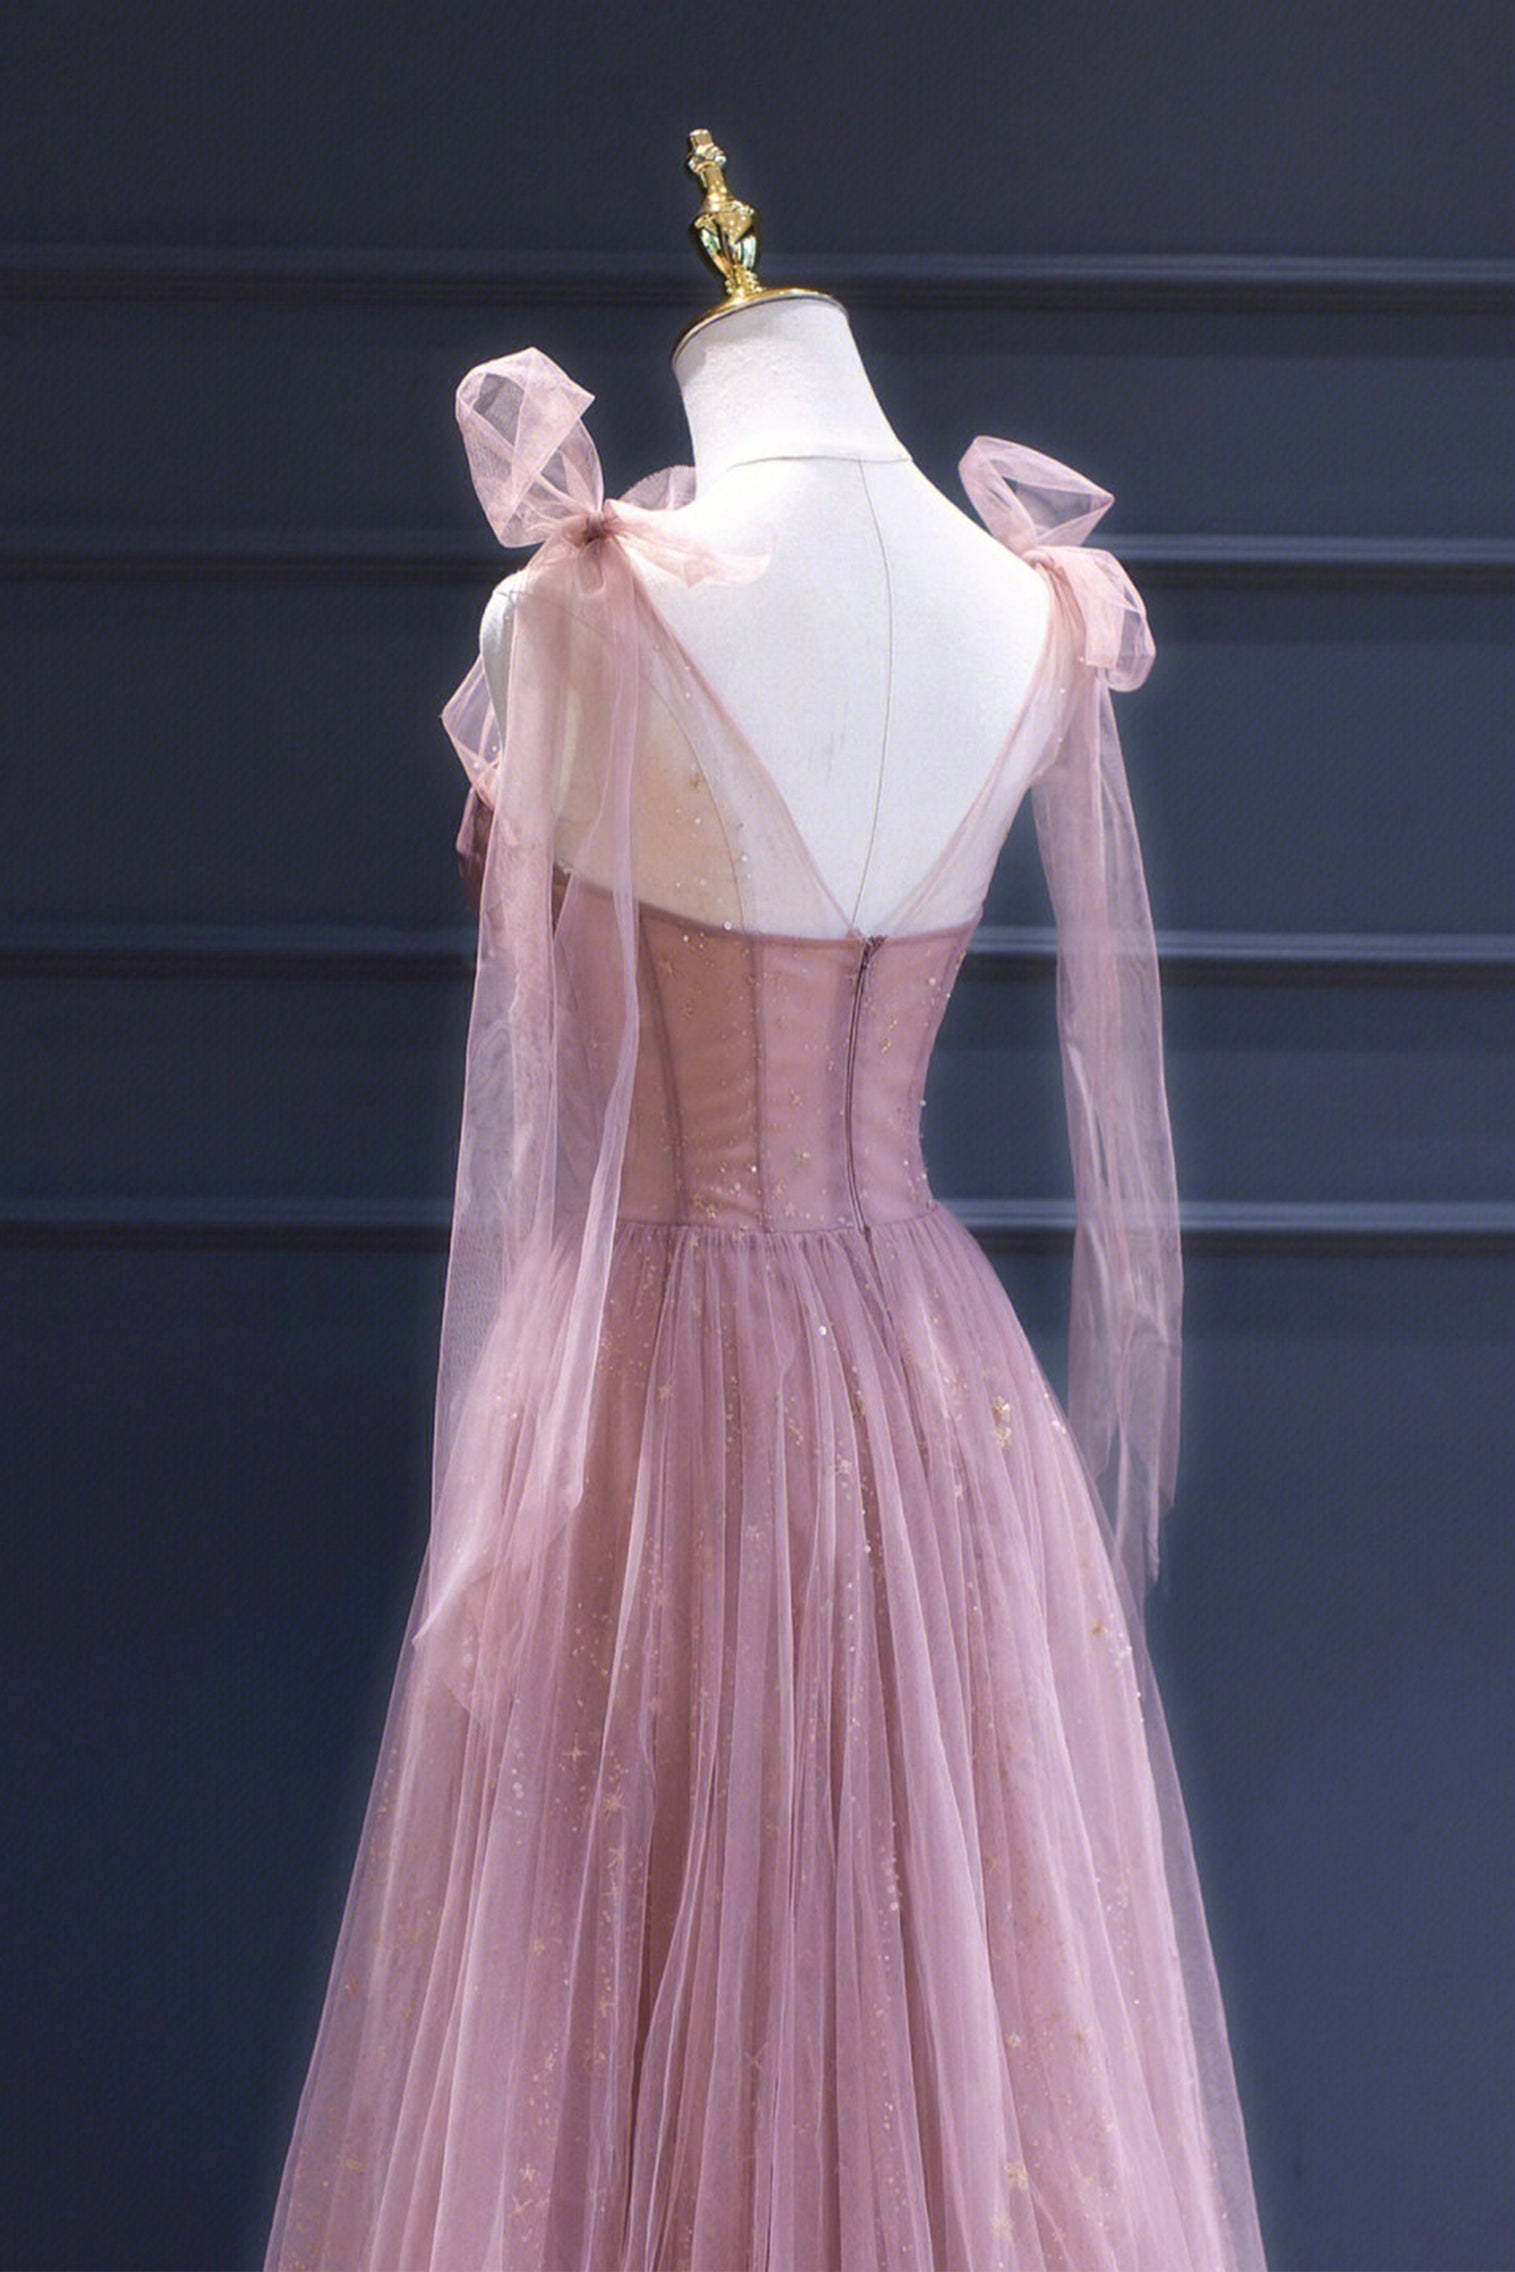 Bridesmaid Dress Convertible, Pink Tulle Long A-Line Prom Dress, Pink Evening Dress with Corset